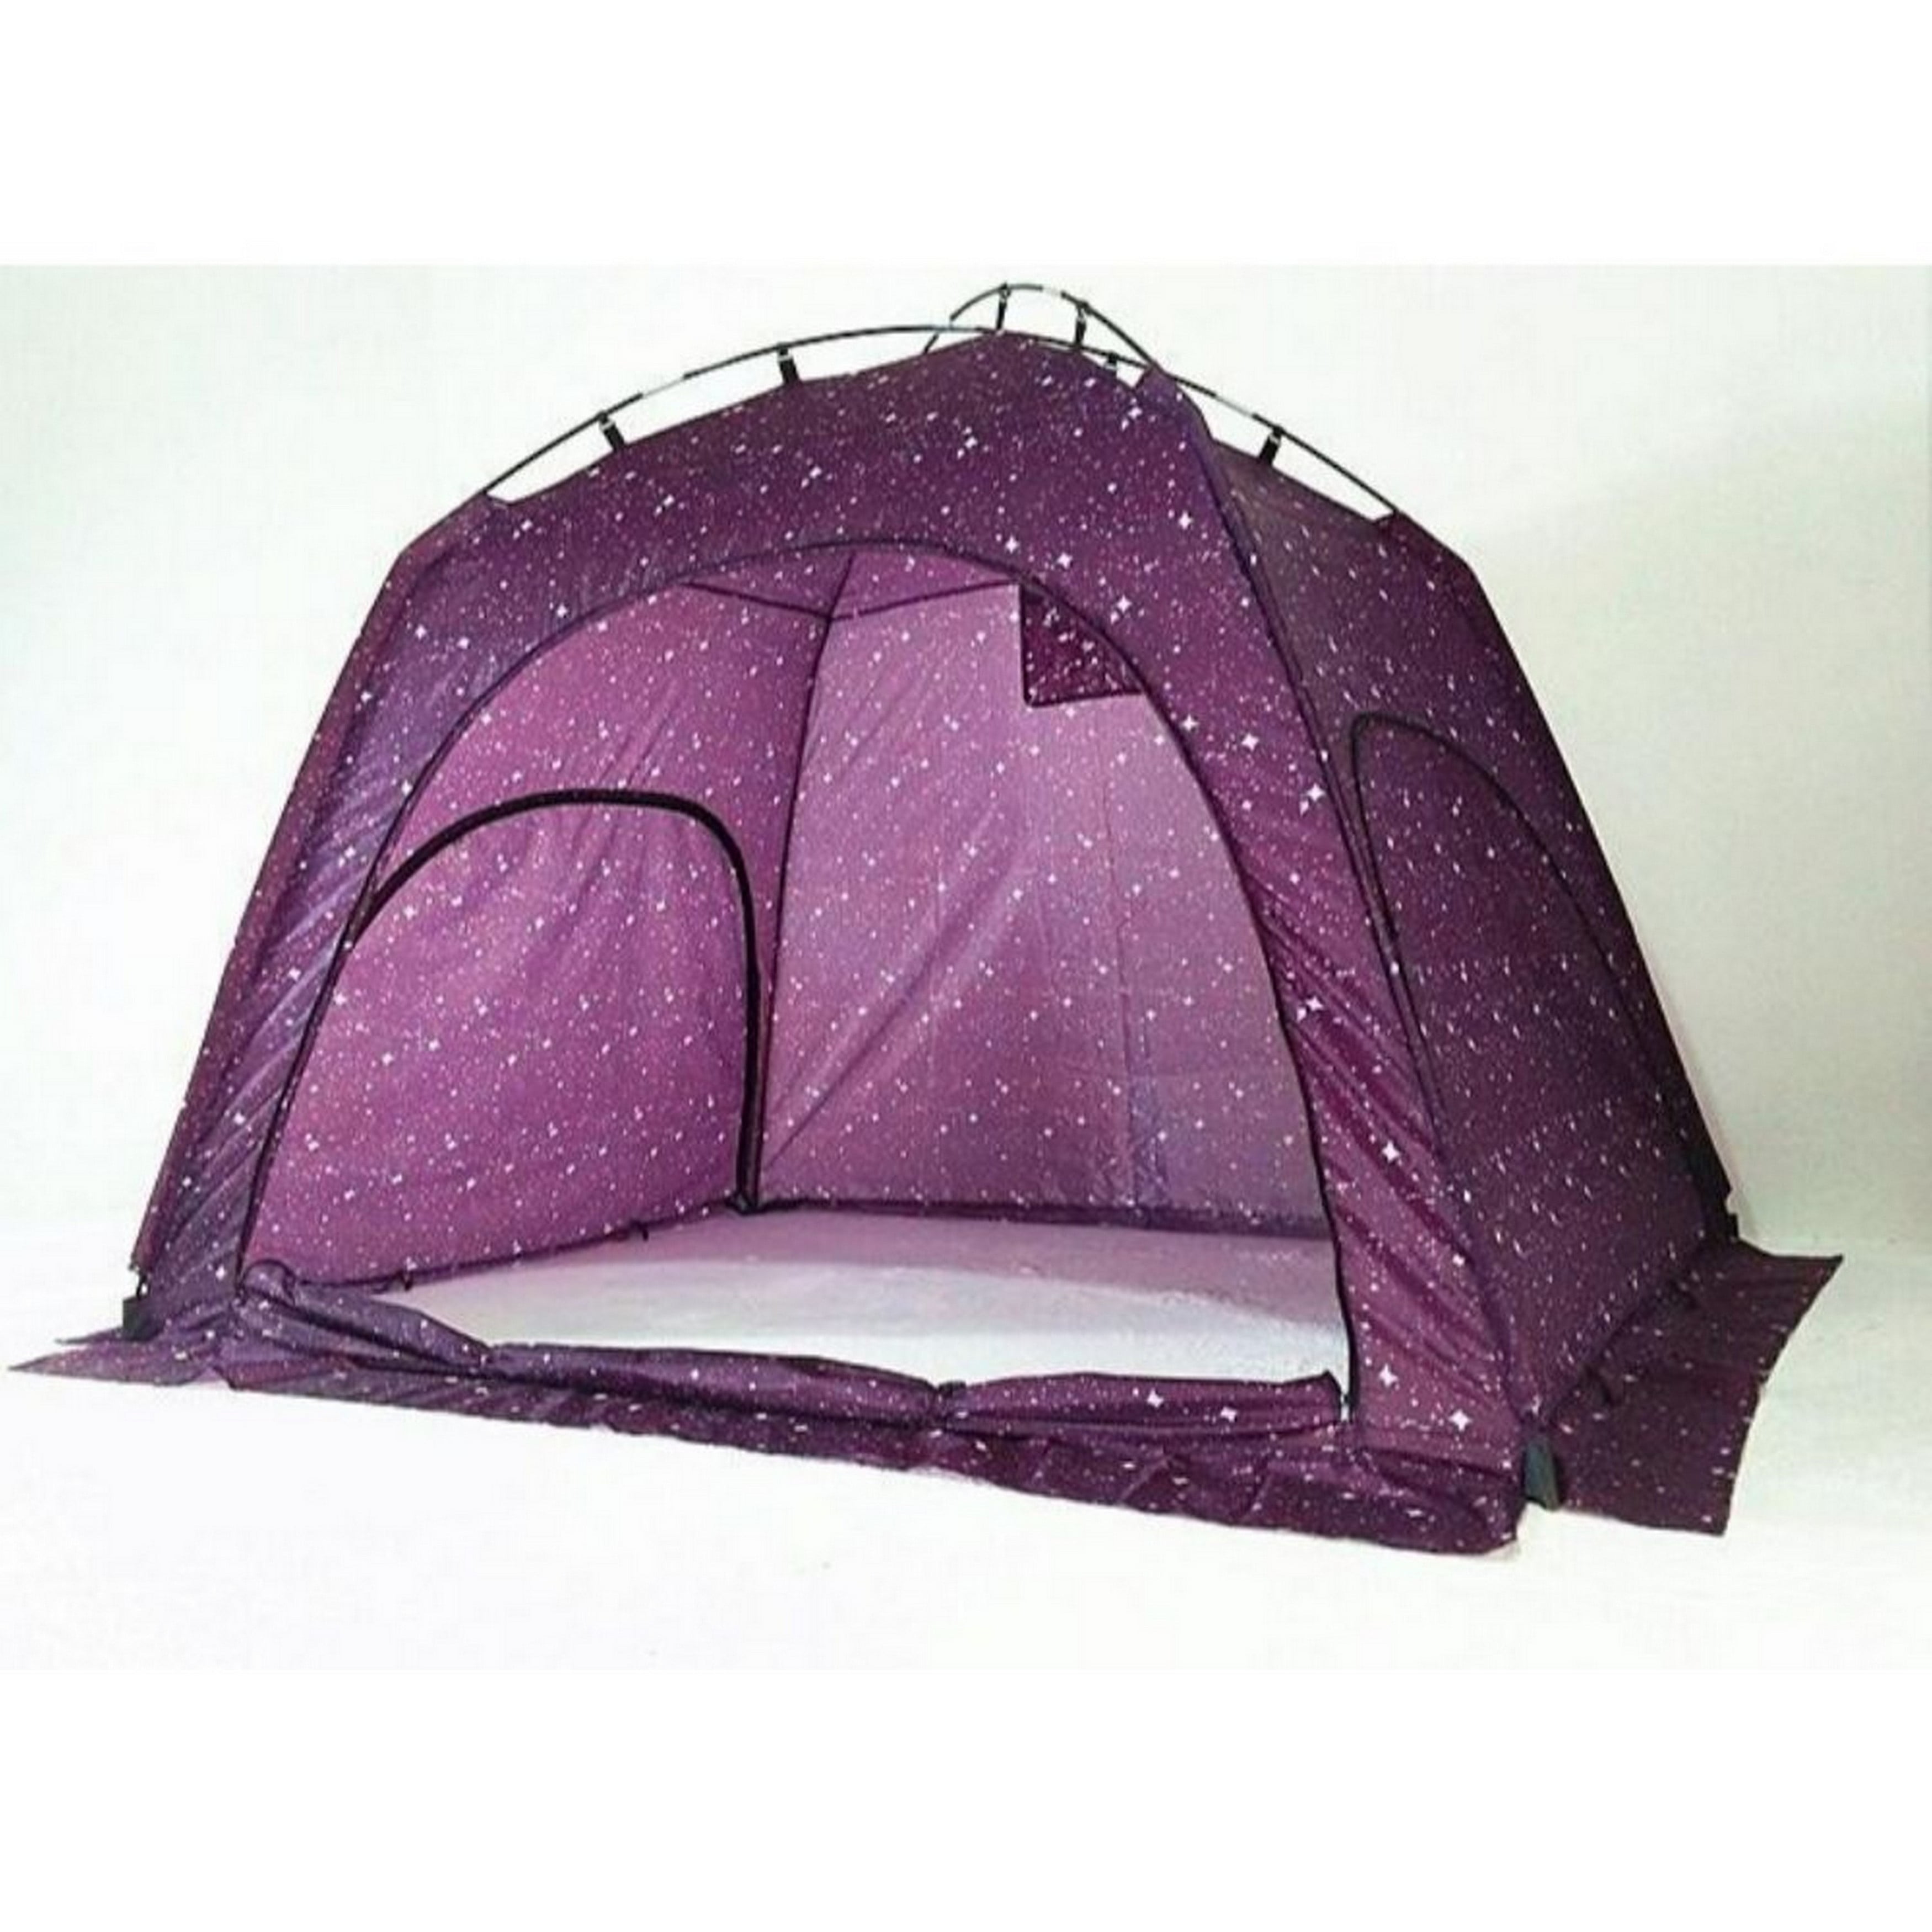 Stunning Privacy Play Tent on Bed, Warm Sleep Bed Tent for